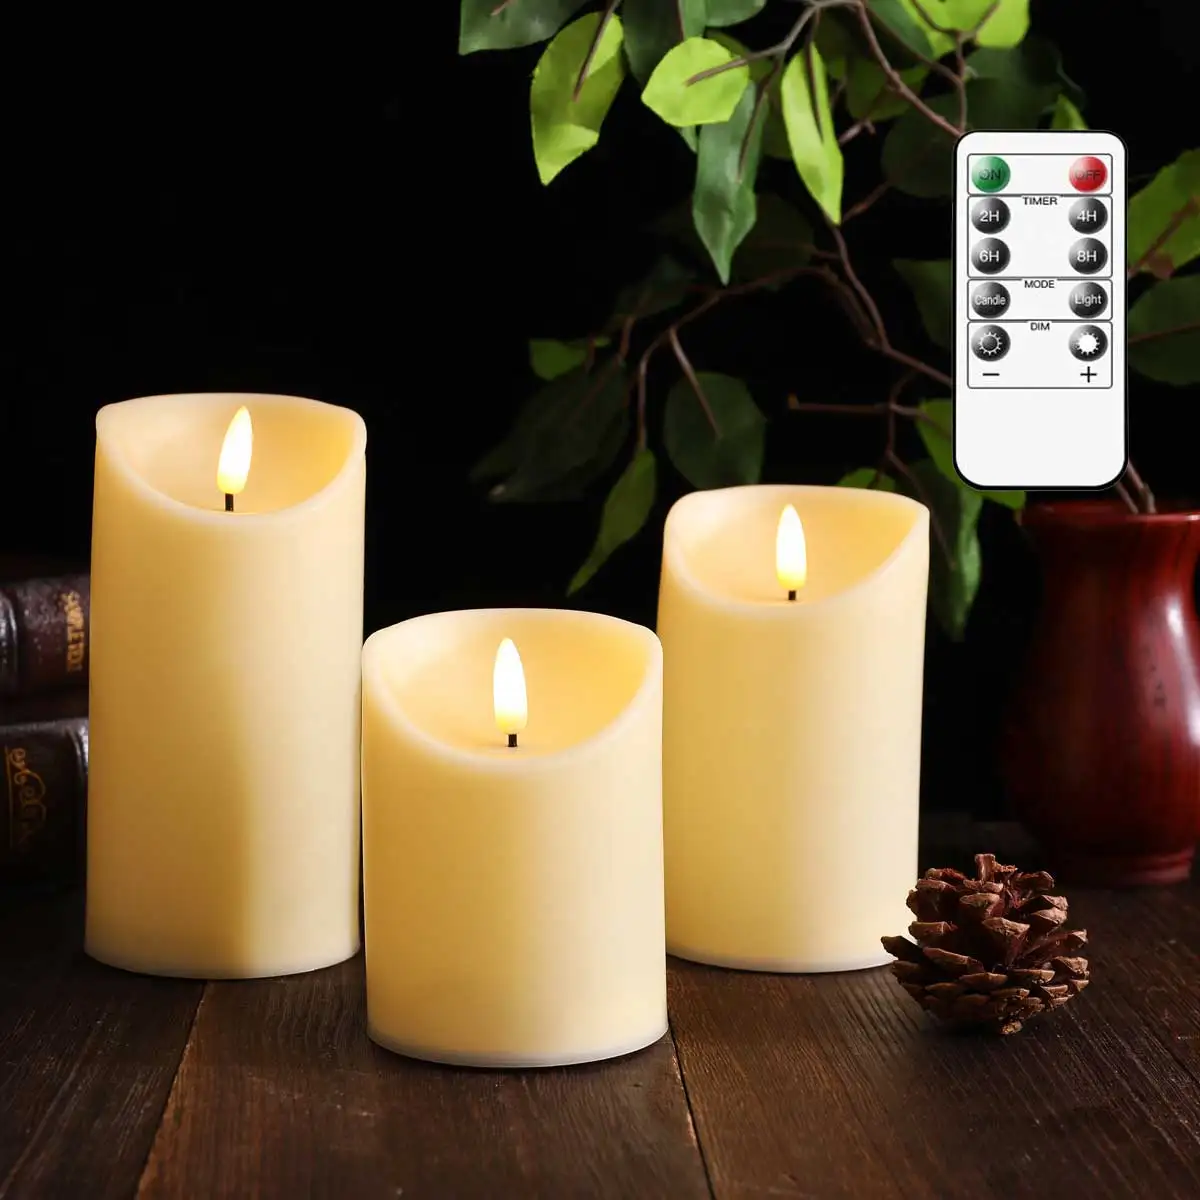 3 Pieces Electronic LED Candles With Remote,Battery Operated New Year Votive Church Easter Candles For Wedding